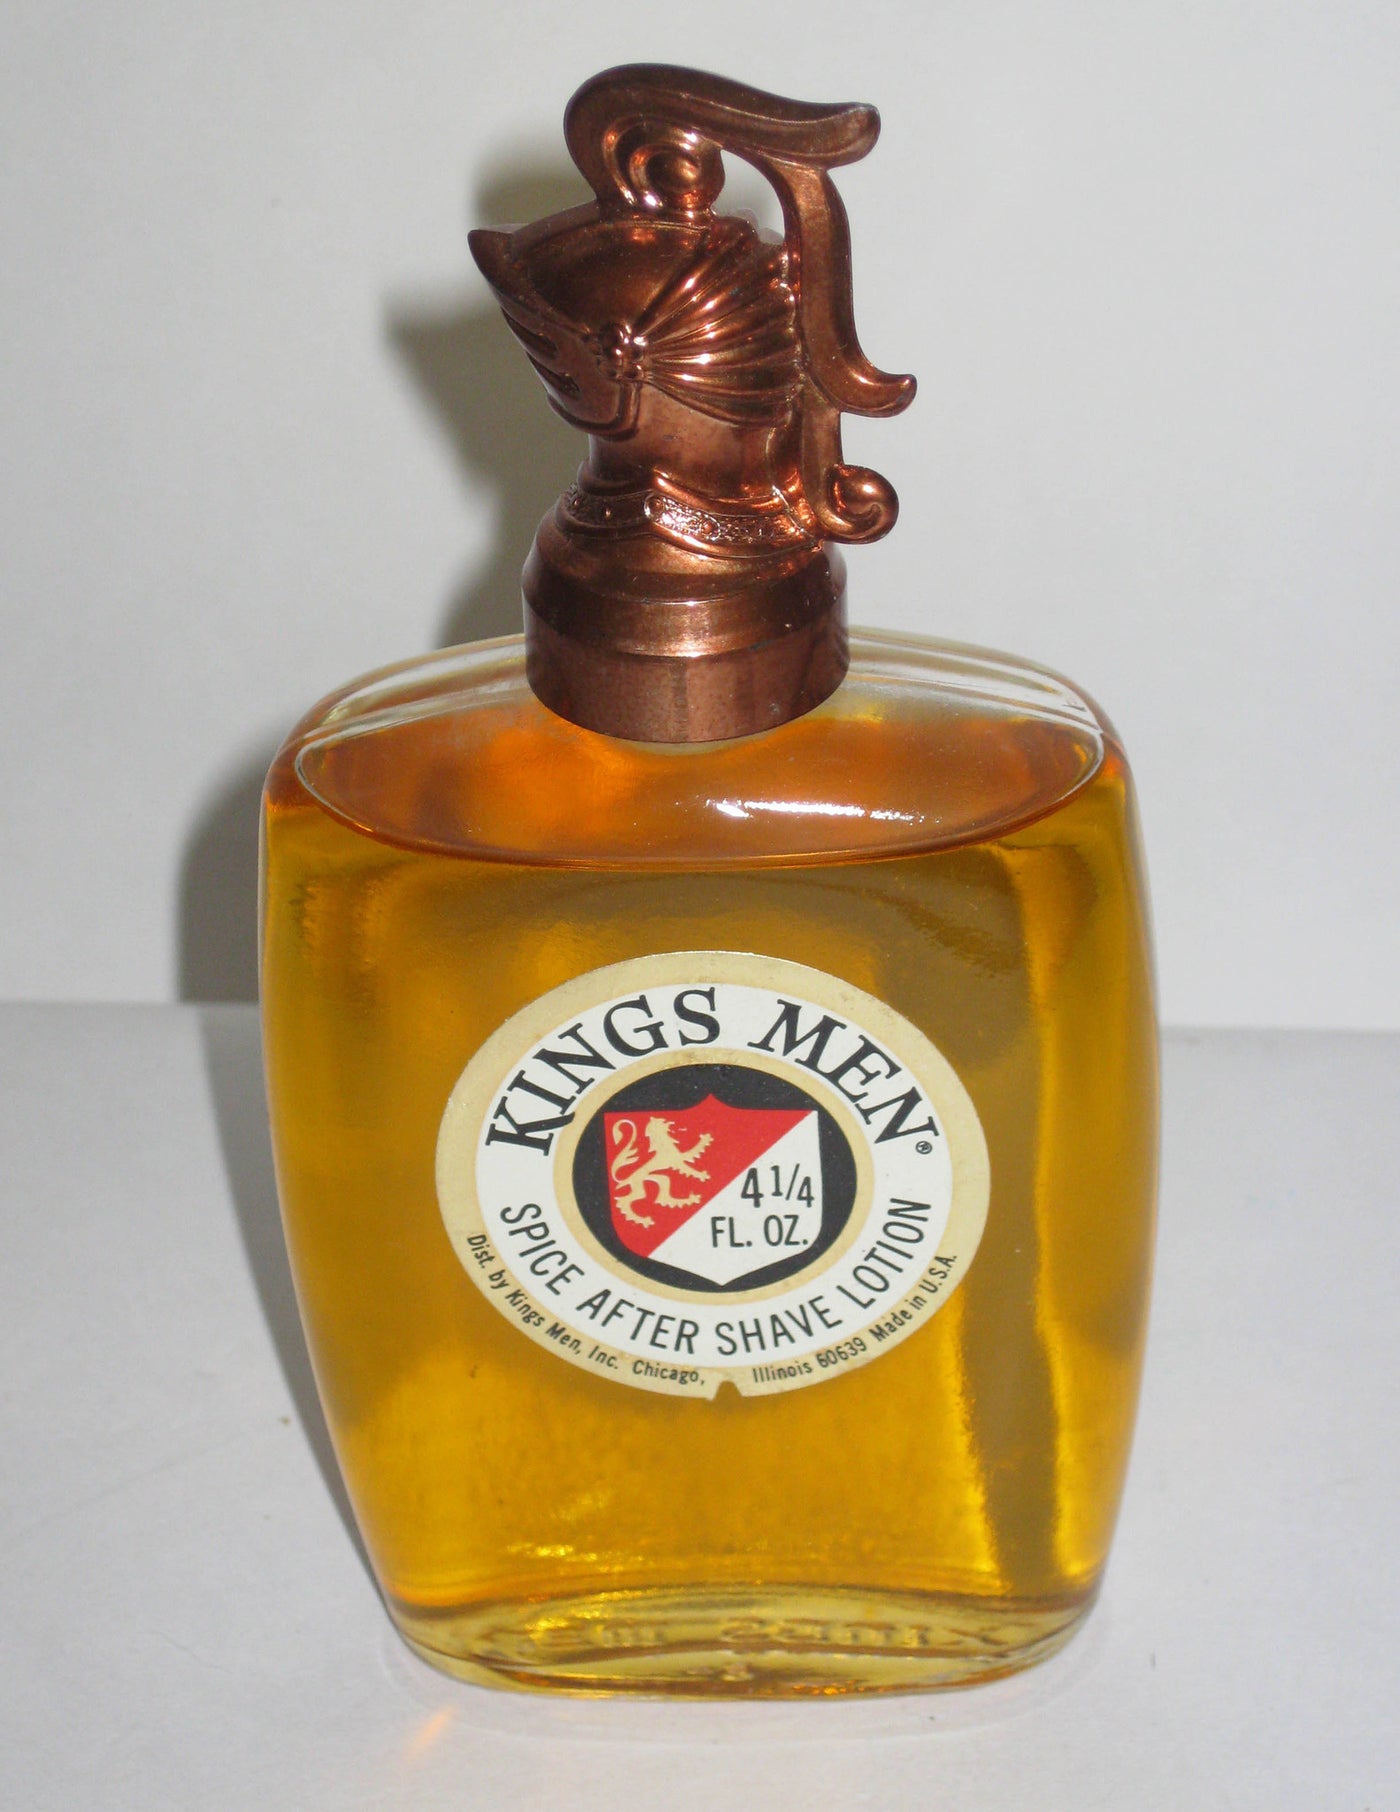 Kings Men Spice After Shave Lotion